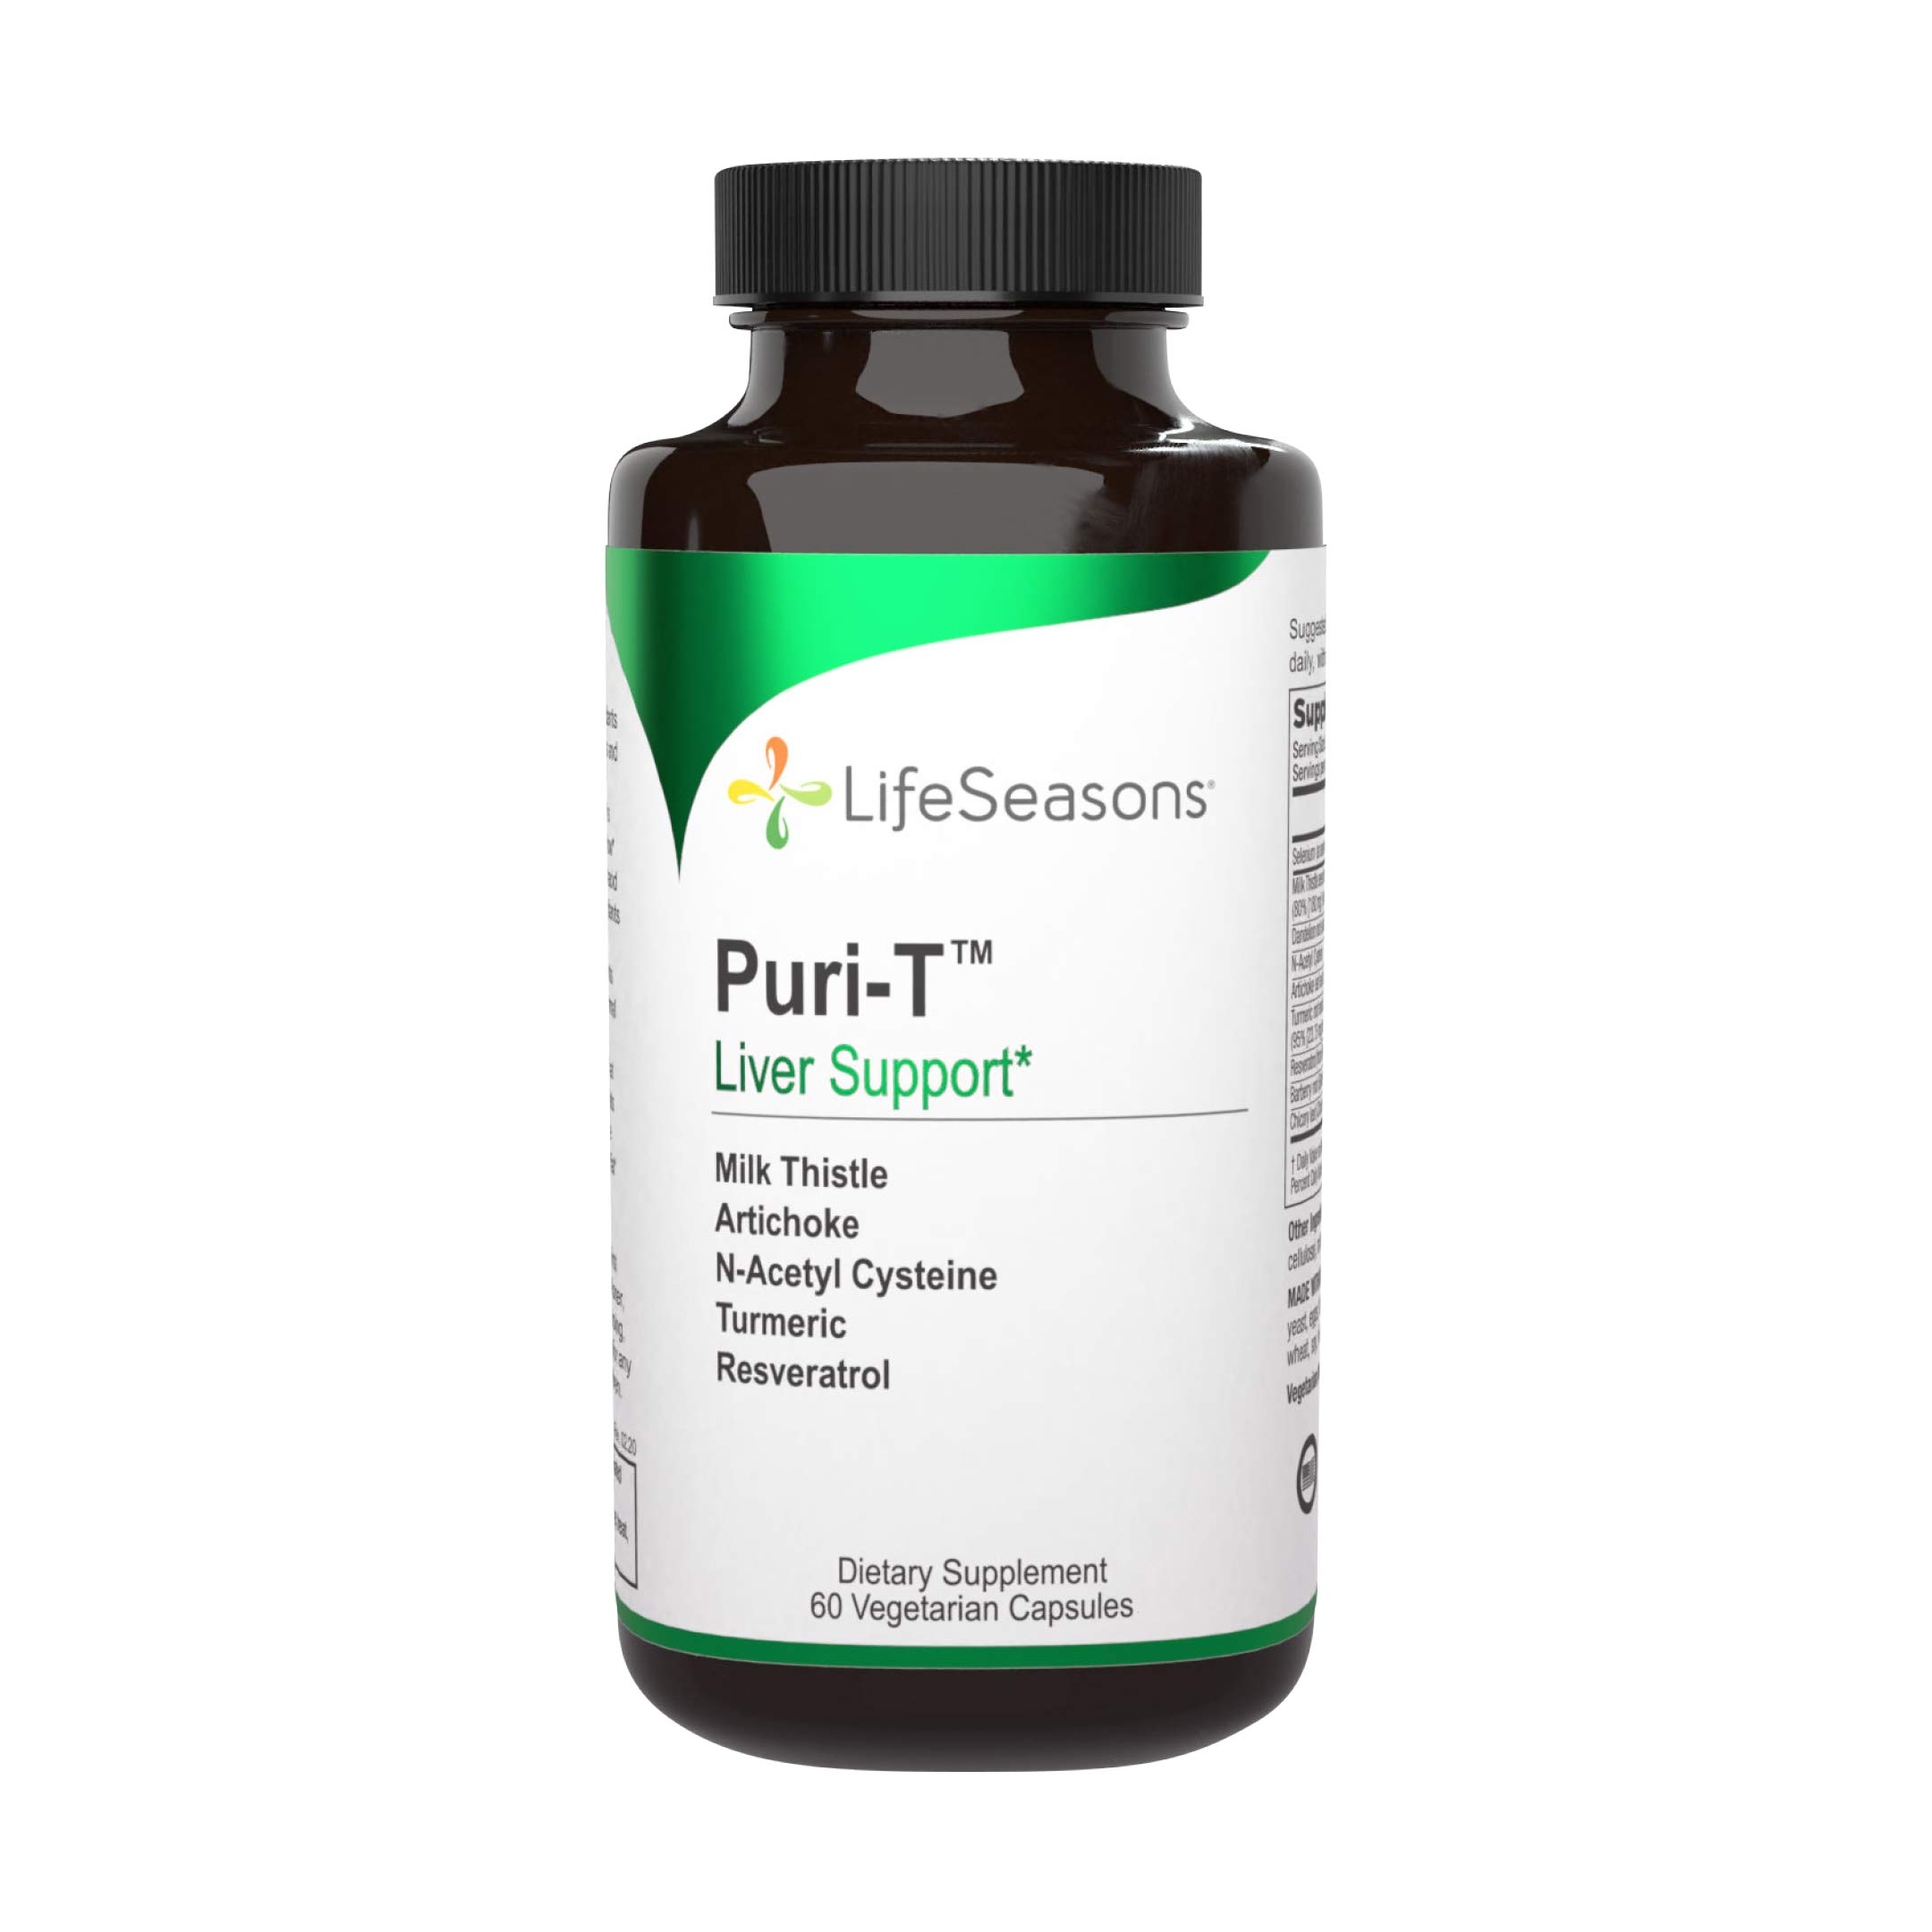 LifeSeasons - Puri-T - Liver Support and Cleanse Supplement - Support Stamina - Supports Liver Tissue and Aids in Healthy Bile Flow - Contains Artichoke, N-Acetyl Cysteine, Turmeric, and Milk Thistle - 60 Capsules